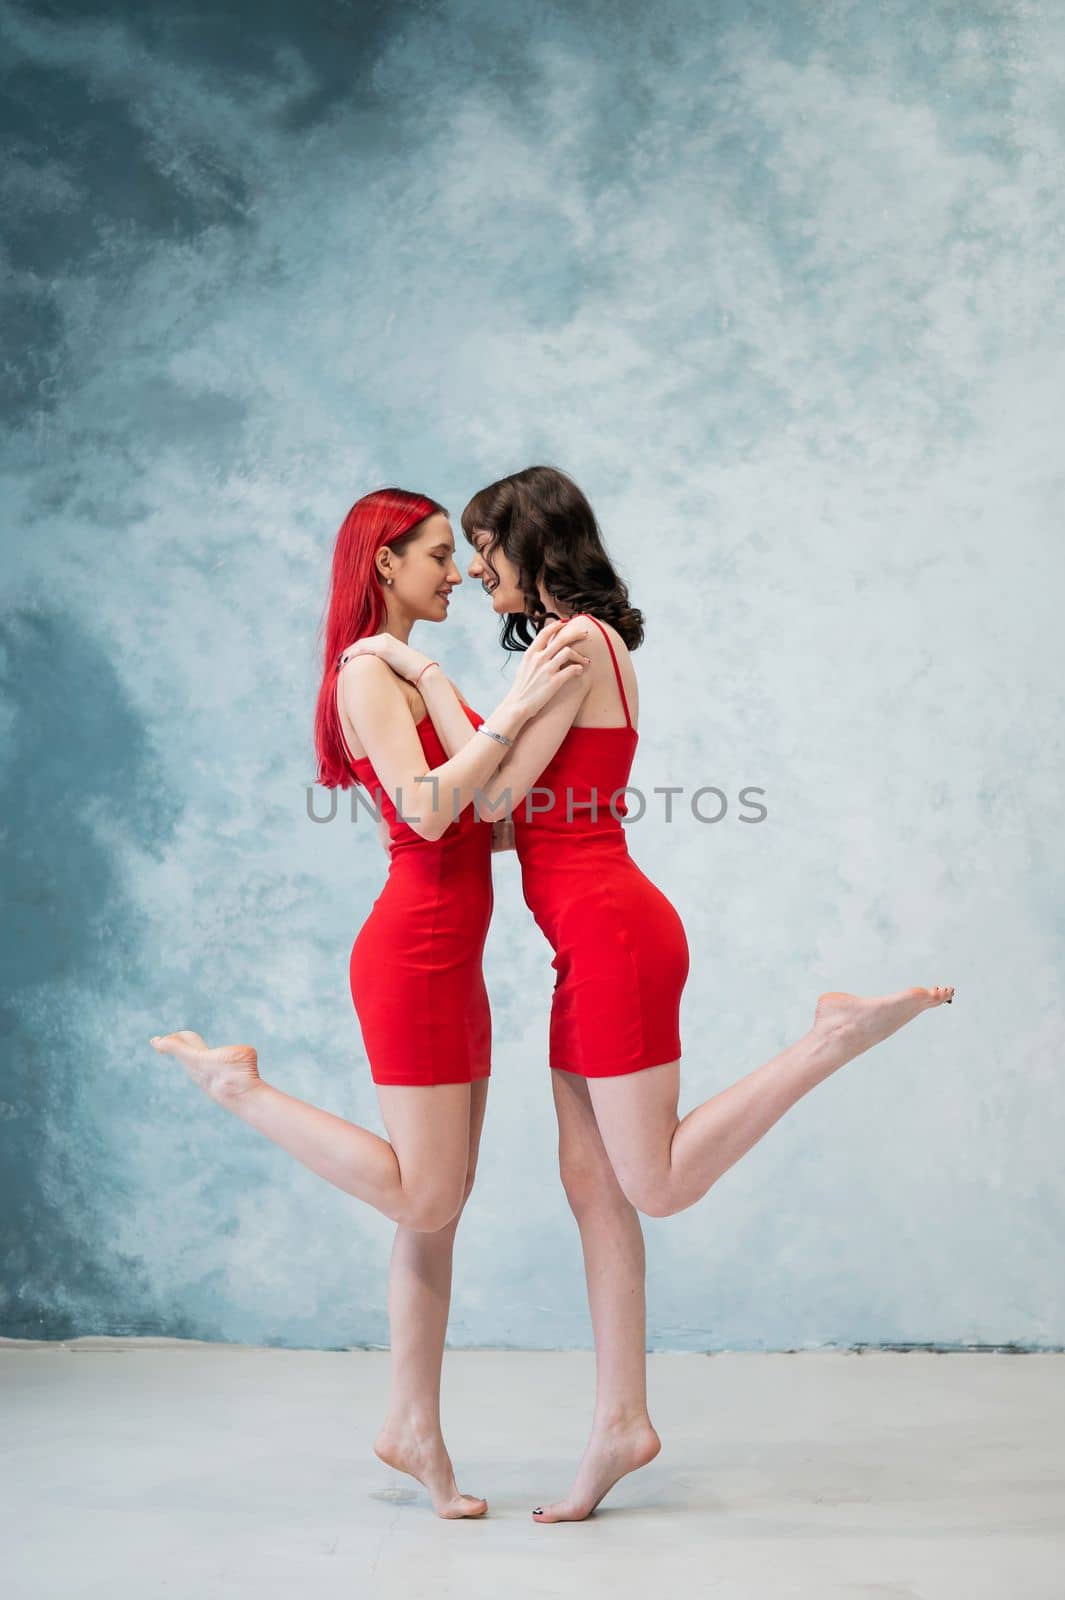 Full-length portrait of two tenderly embracing women dressed in identical red dresses. Lesbian intimacy